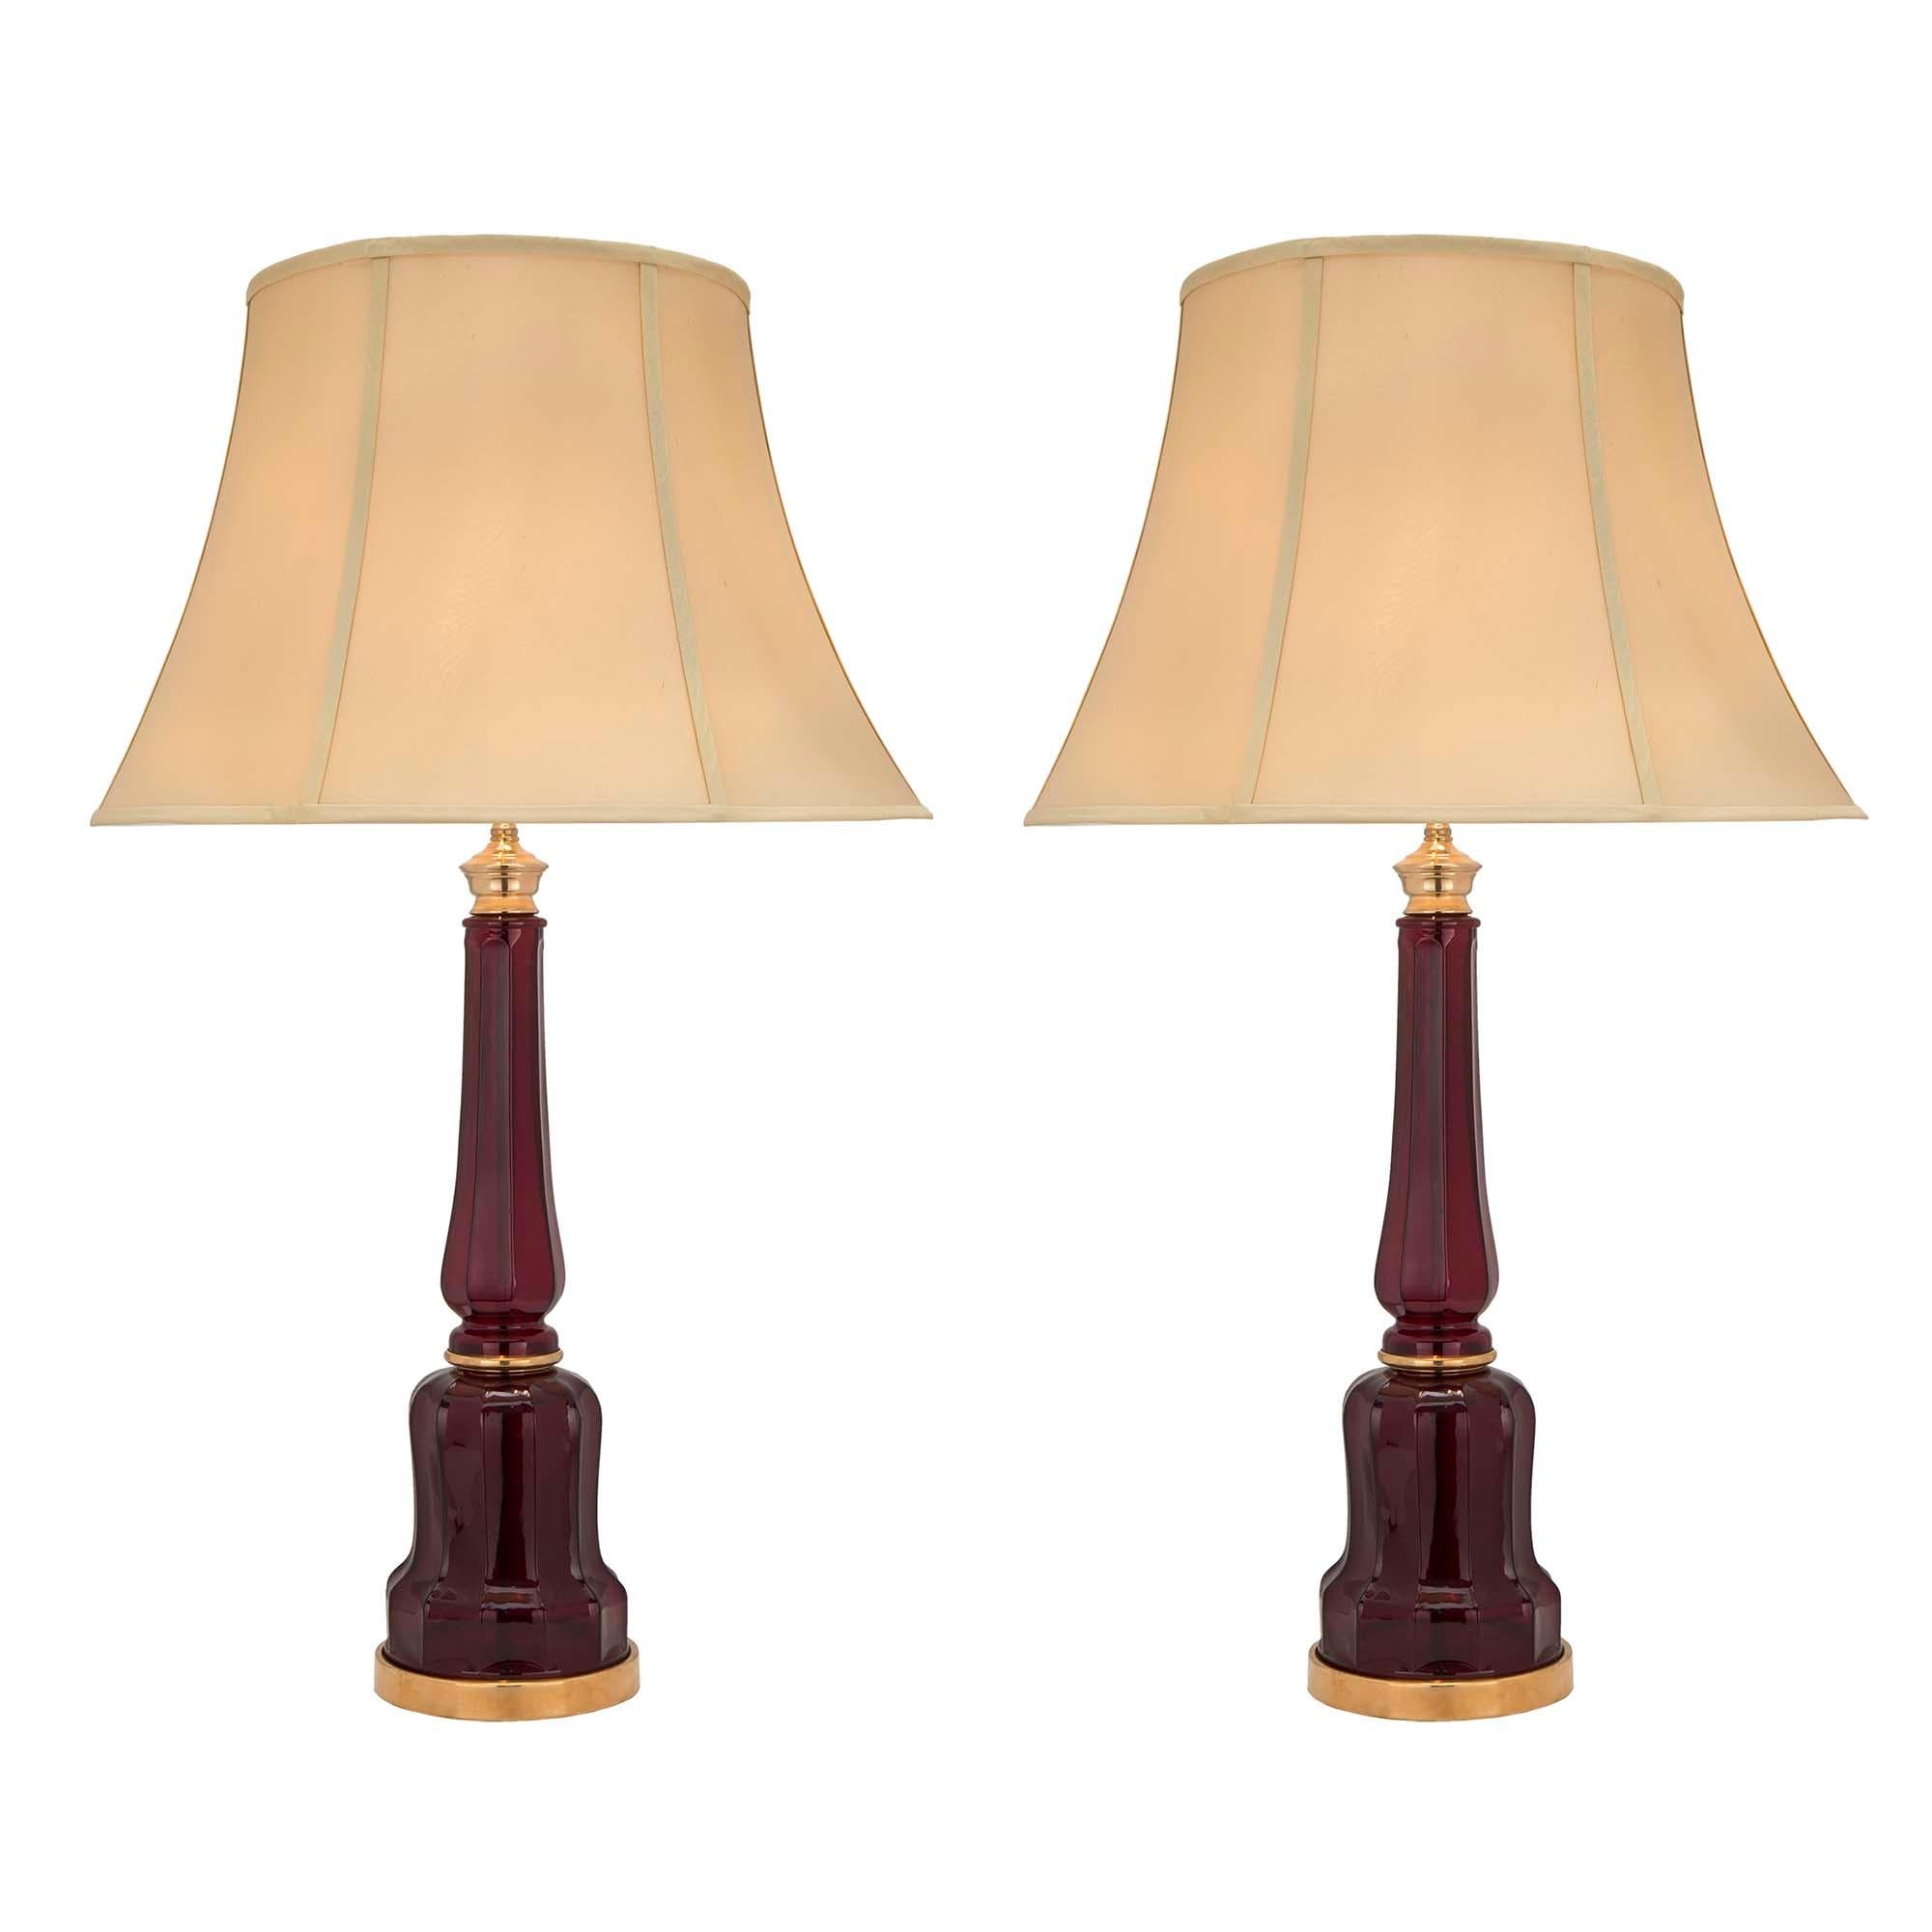 Pair of French 19th Century Oxblood Colored Glass and Ormolu Lamp